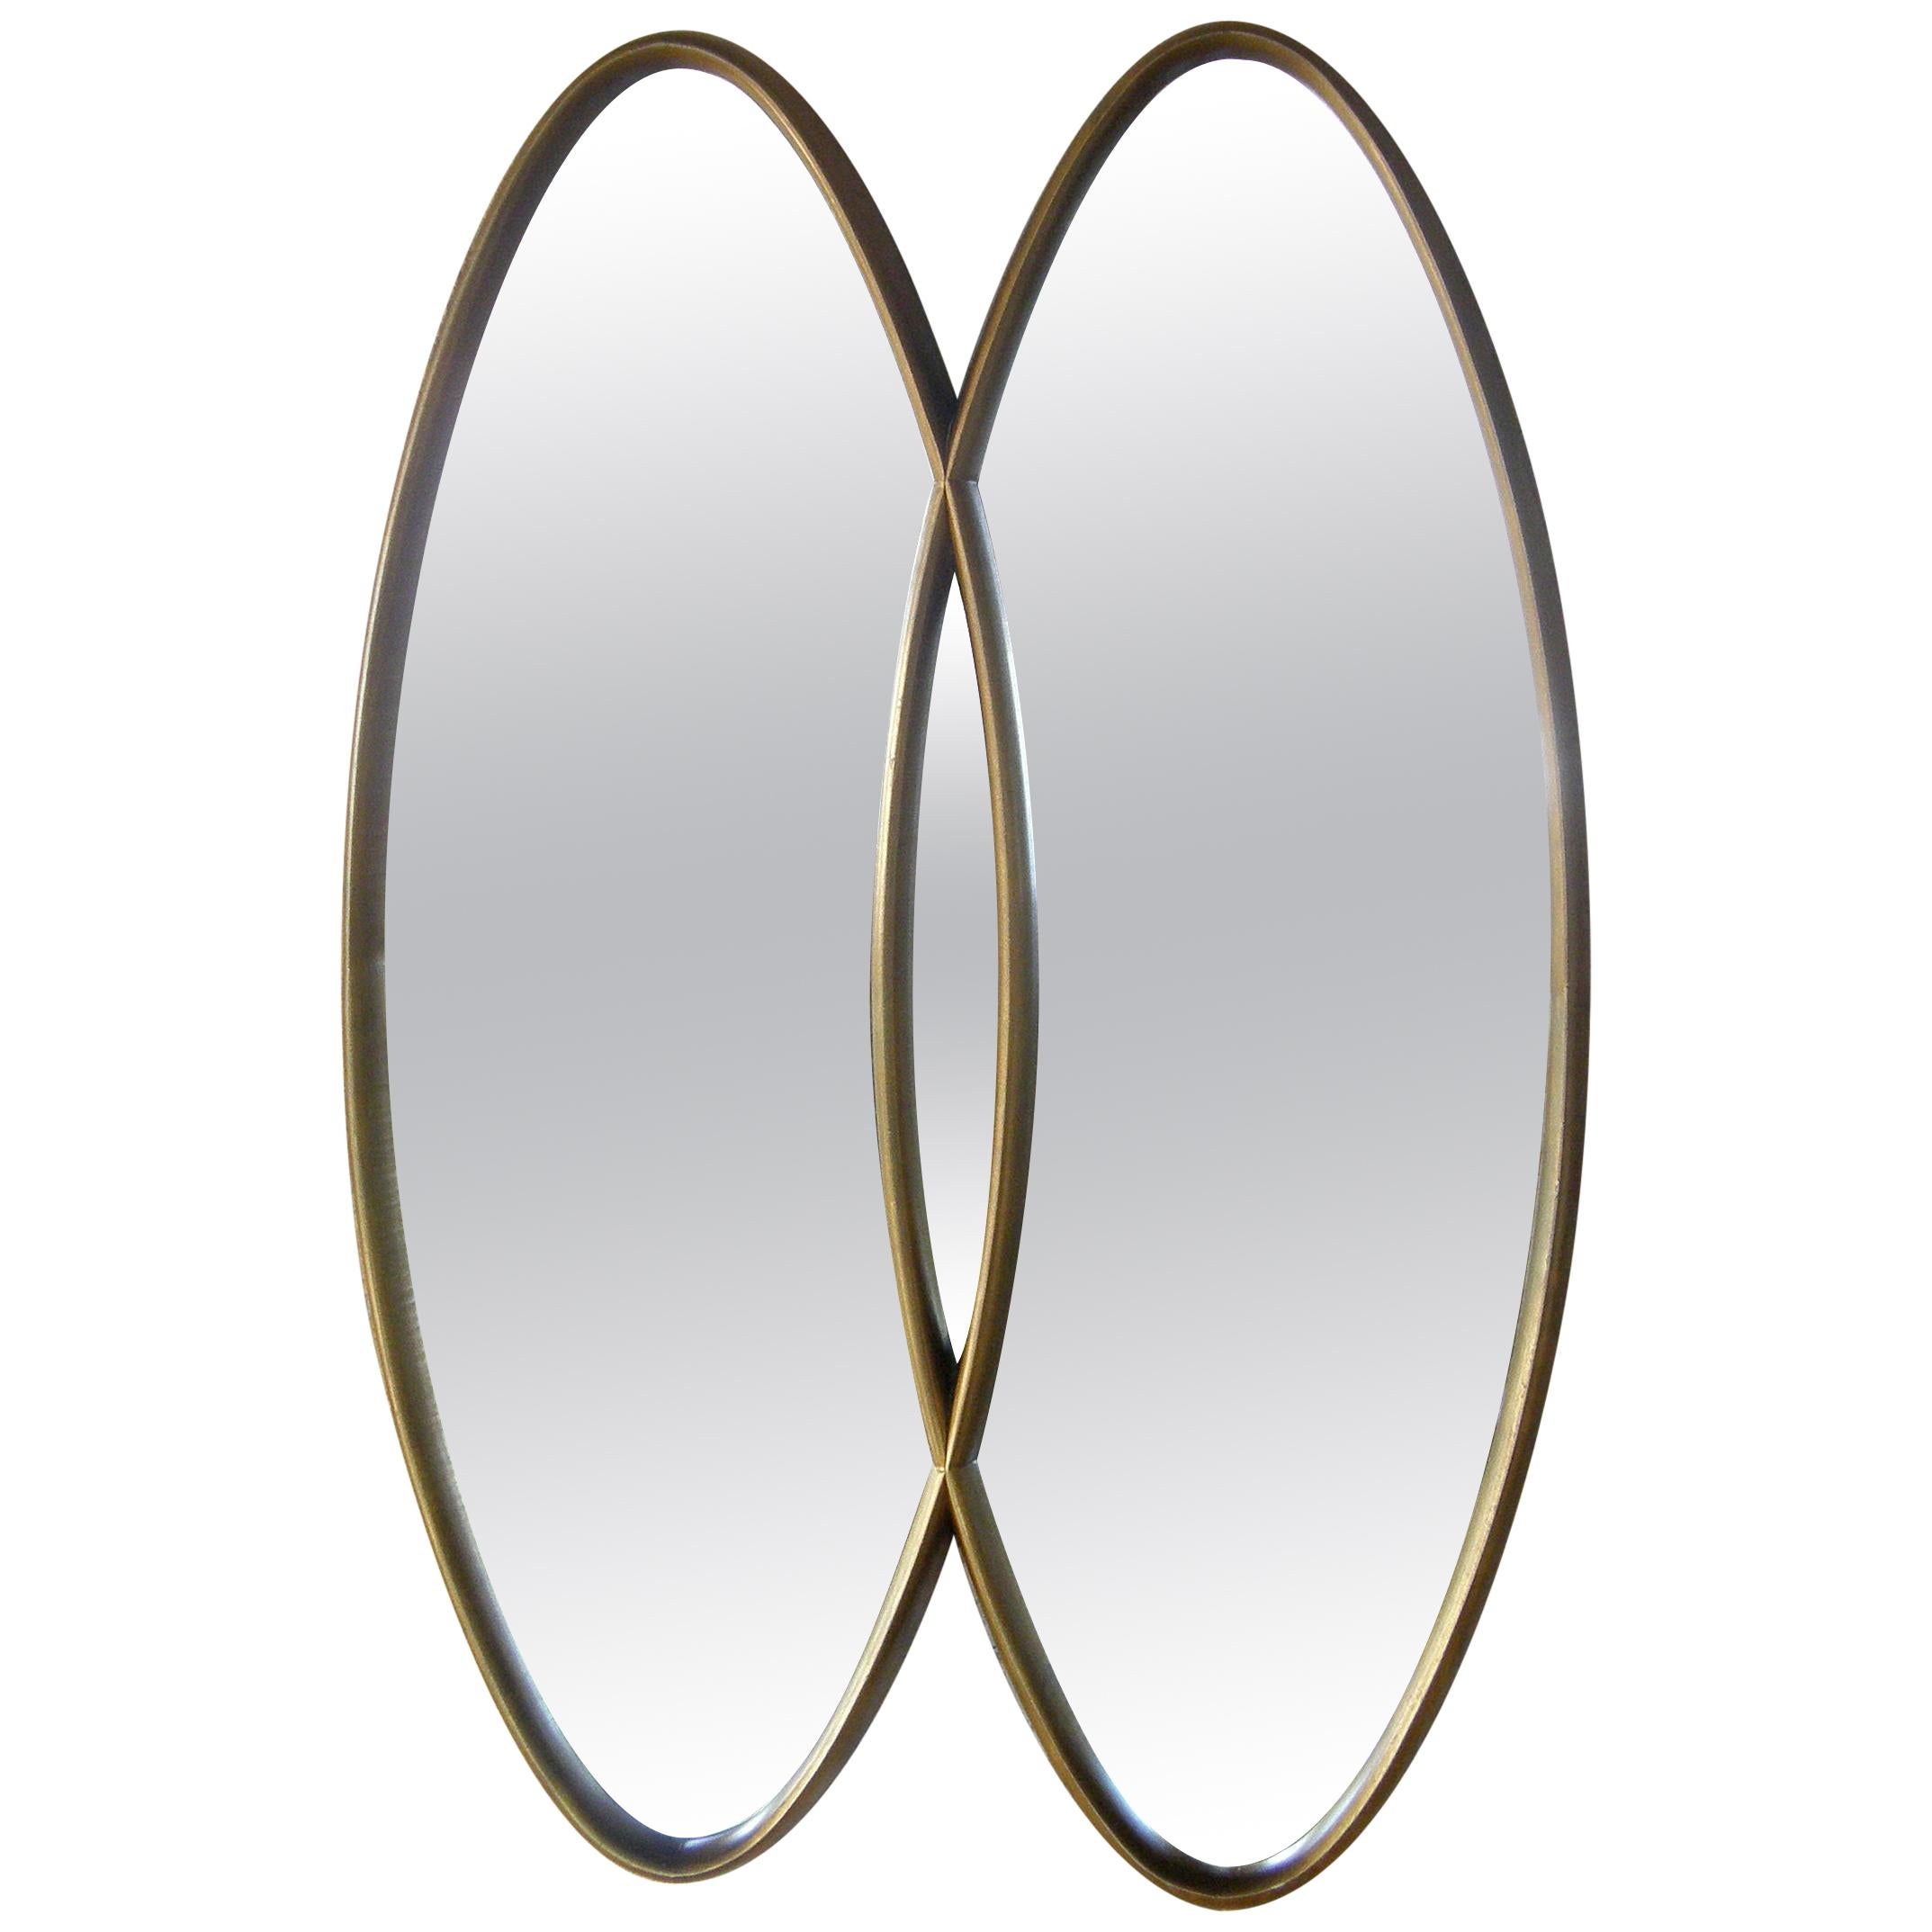 Giltwood Wall Mirror with Interlocking Double Oval Design